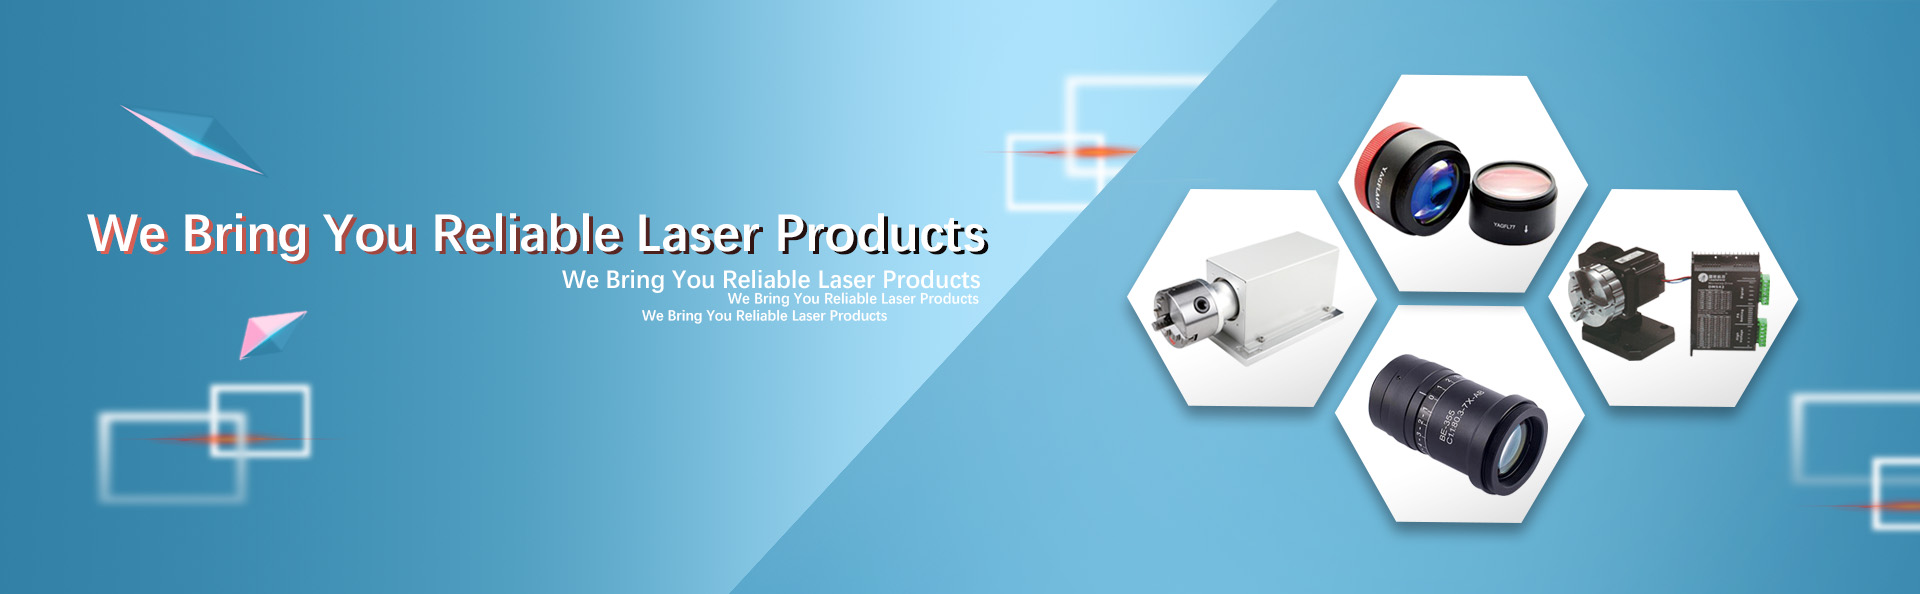 Parts for laser machines with premium quality and performance.